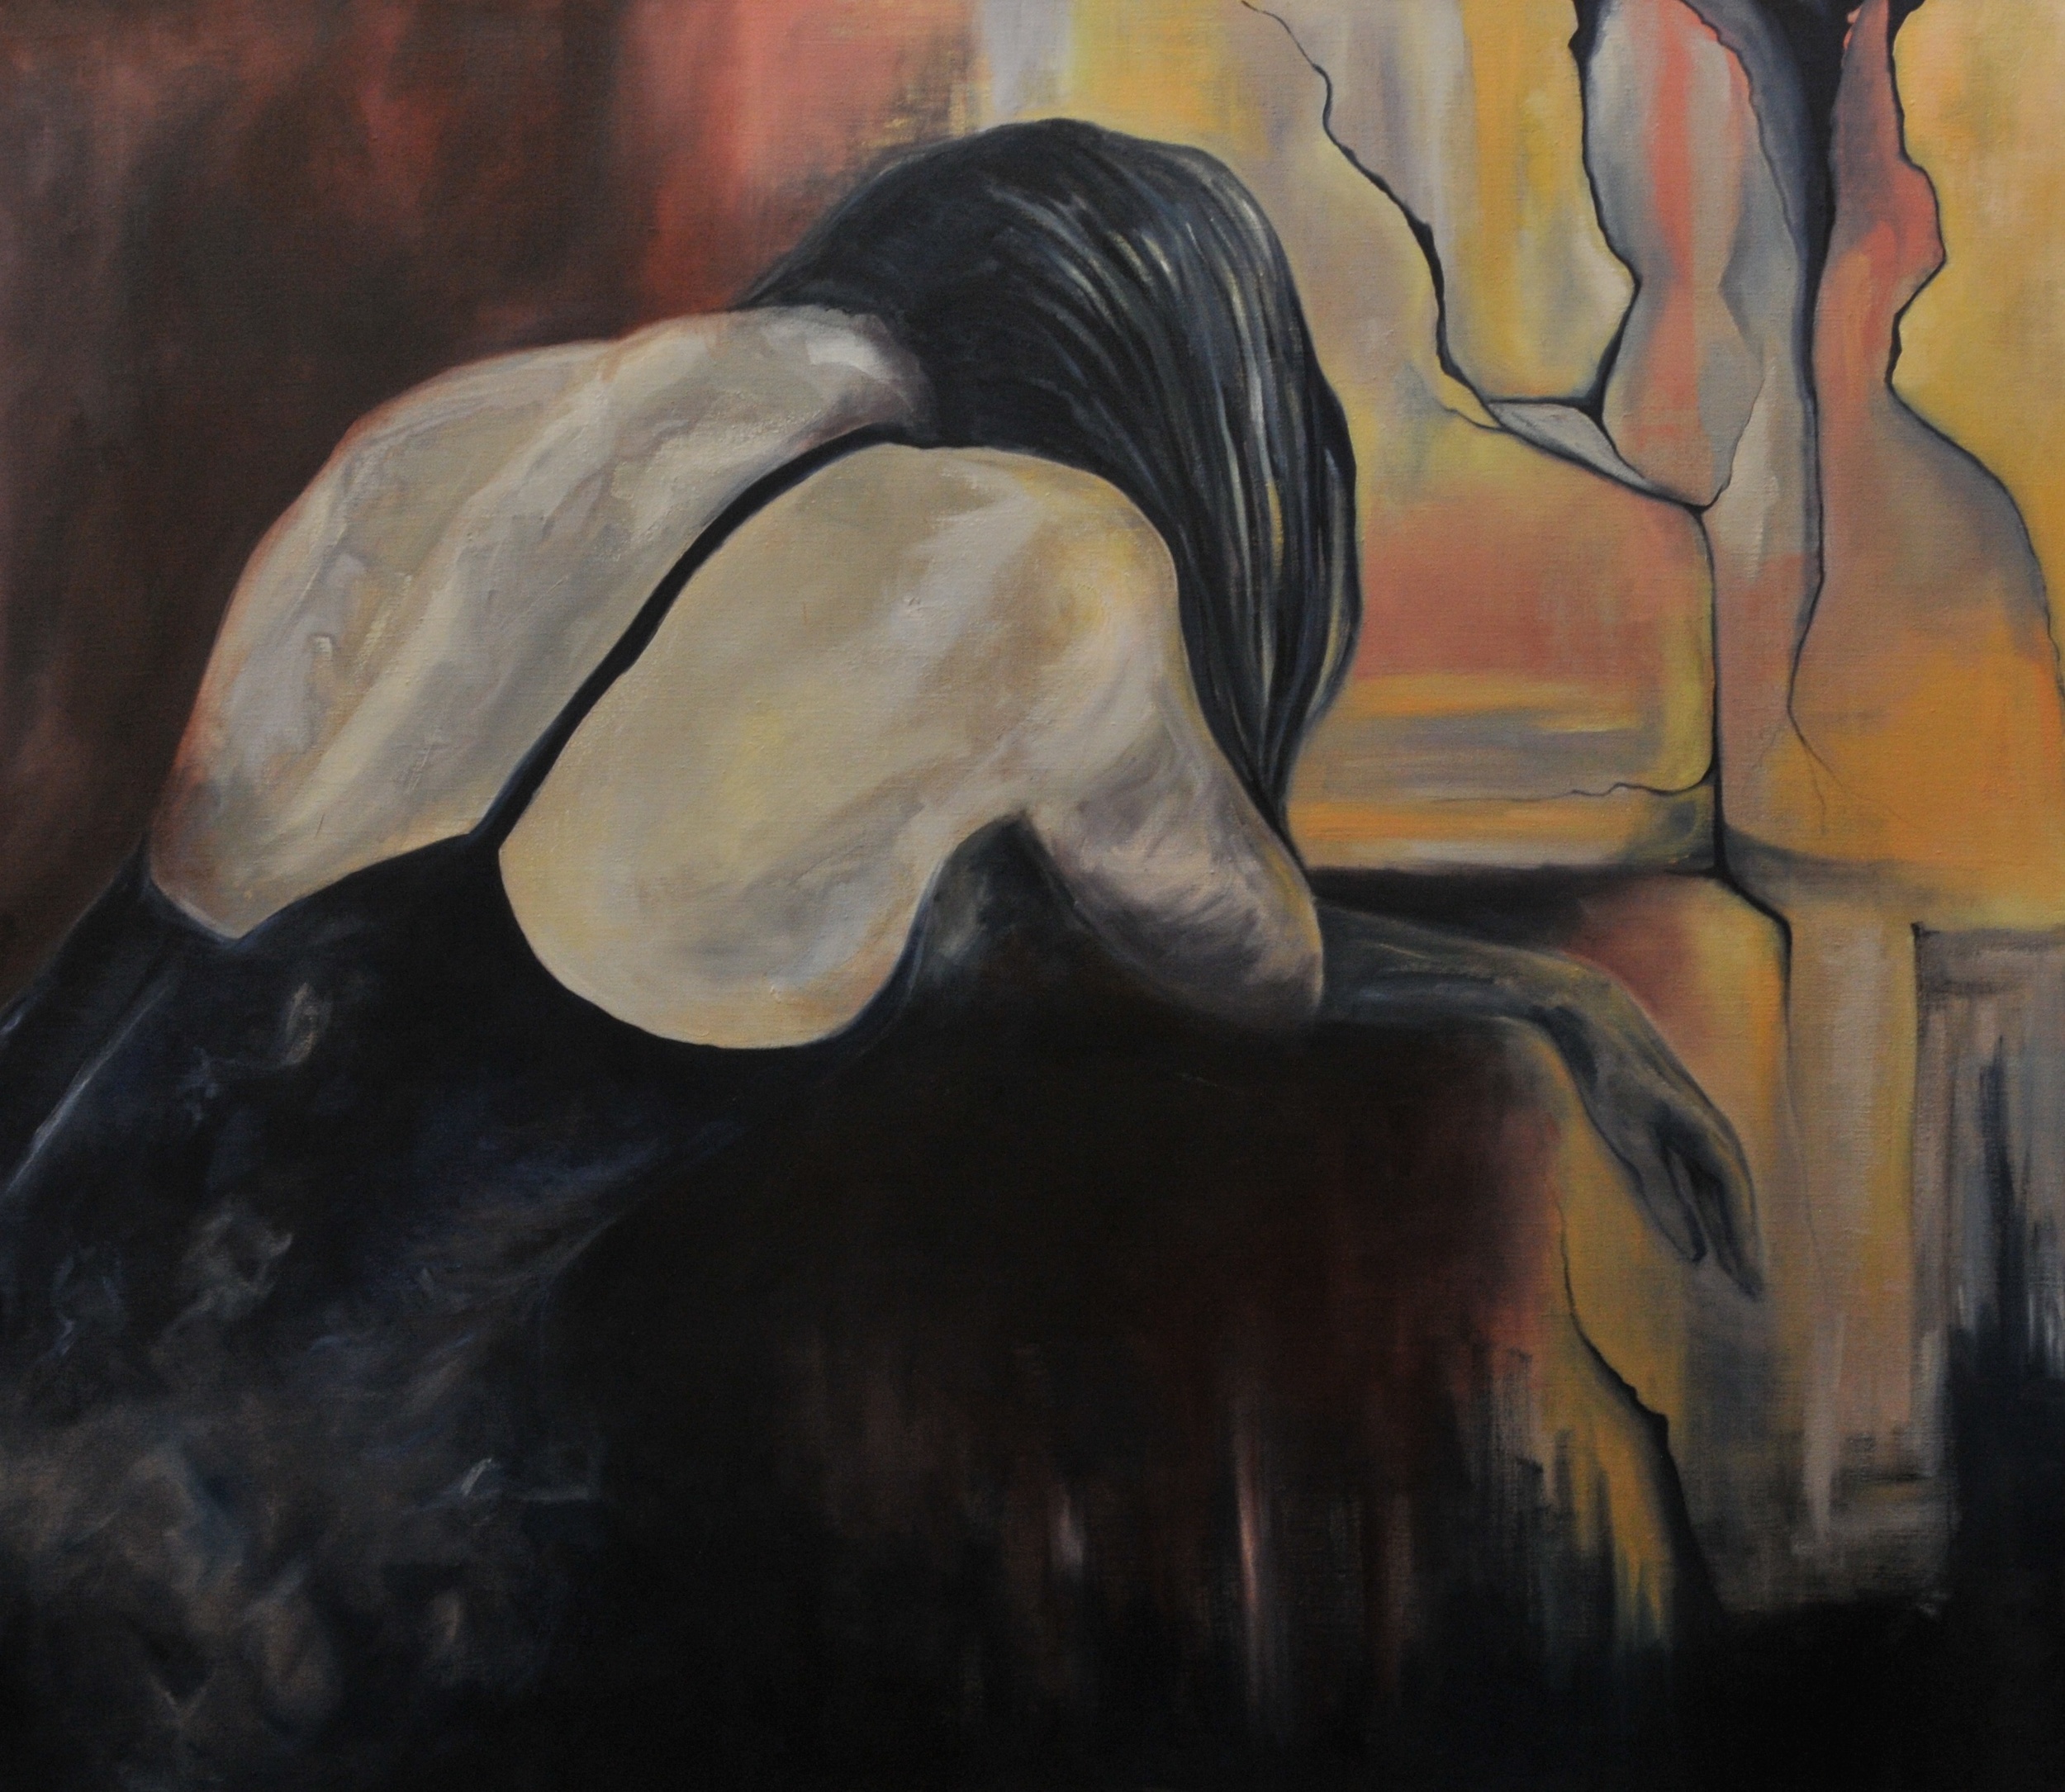  The Wall /Oil on linen 148 x 128 cm 2012 